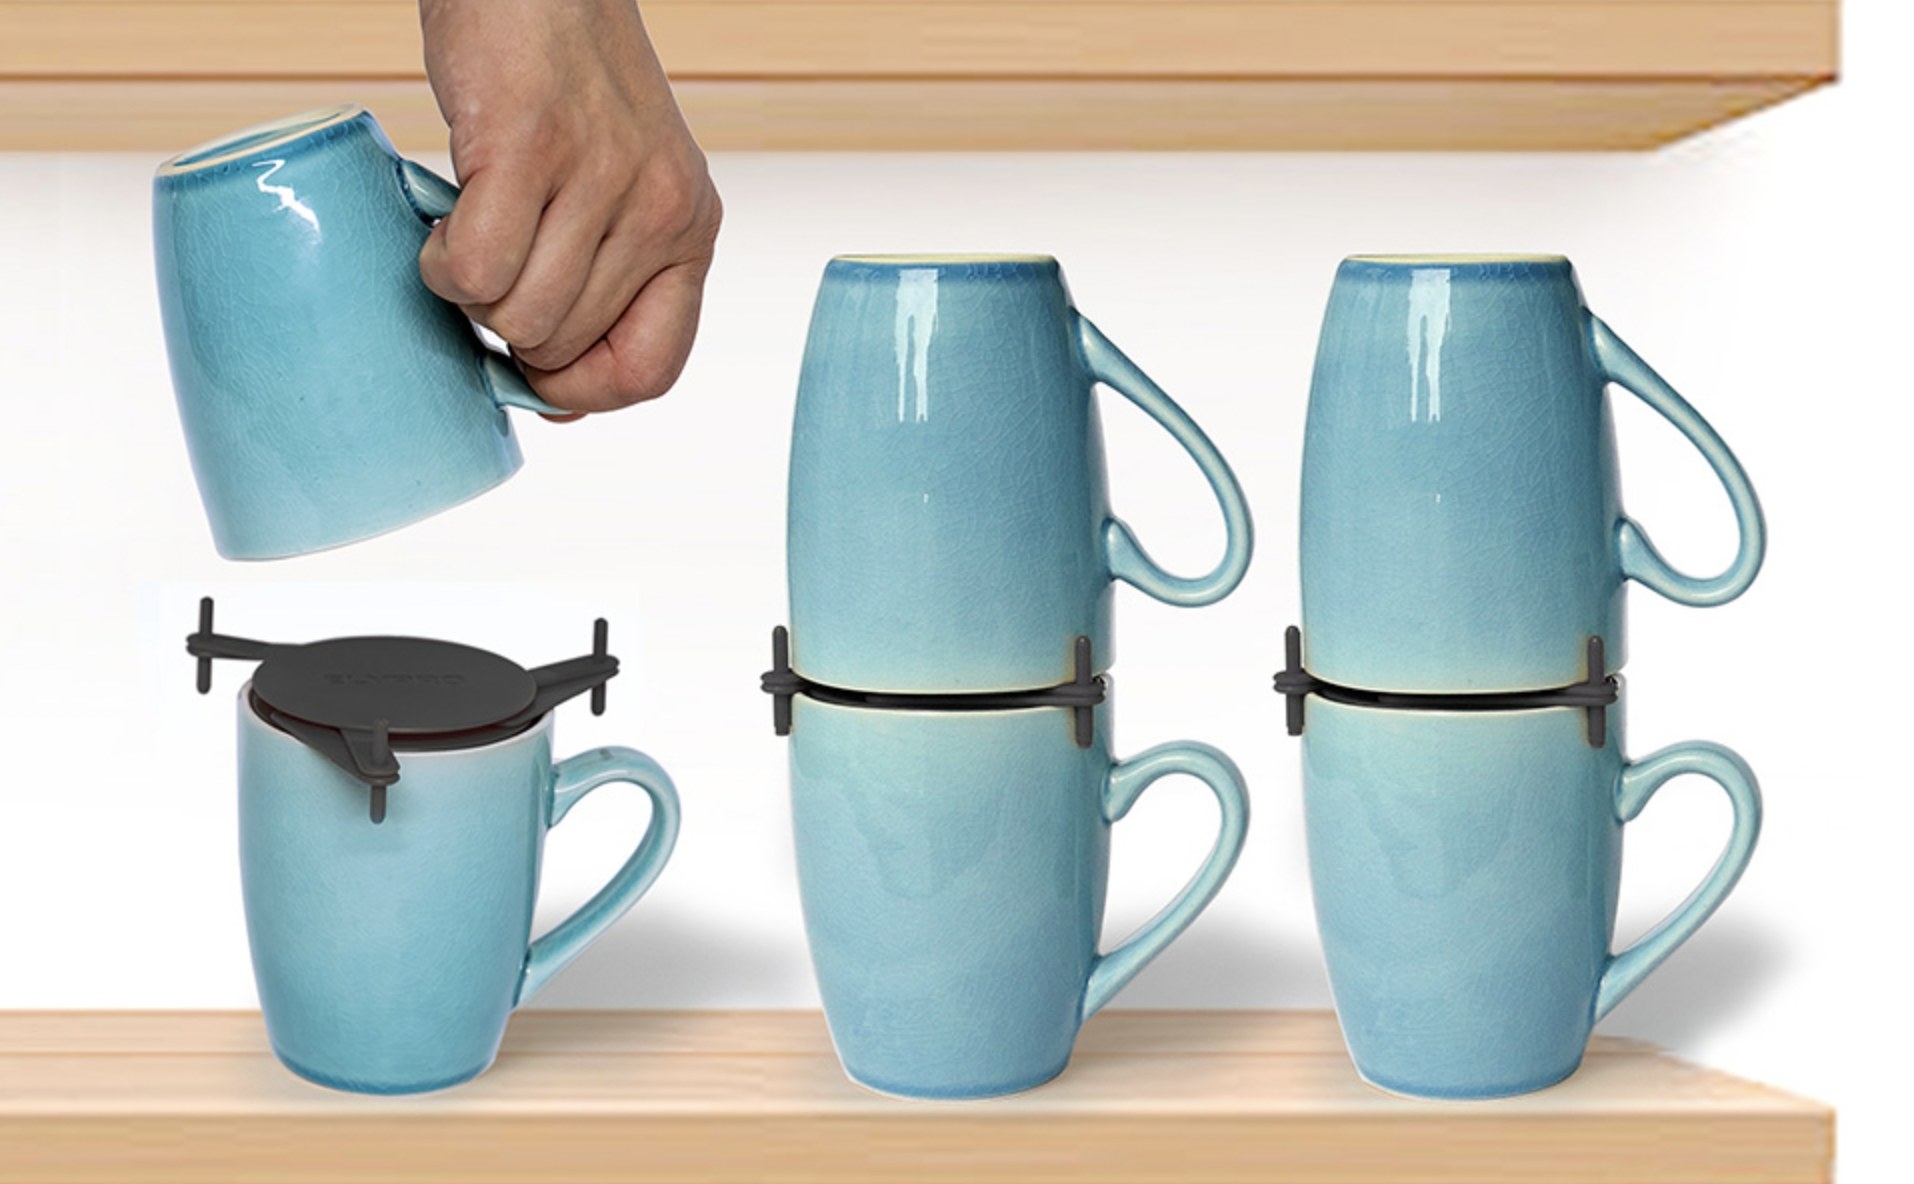 The black organizers being used to stack two mugs on top of each securely